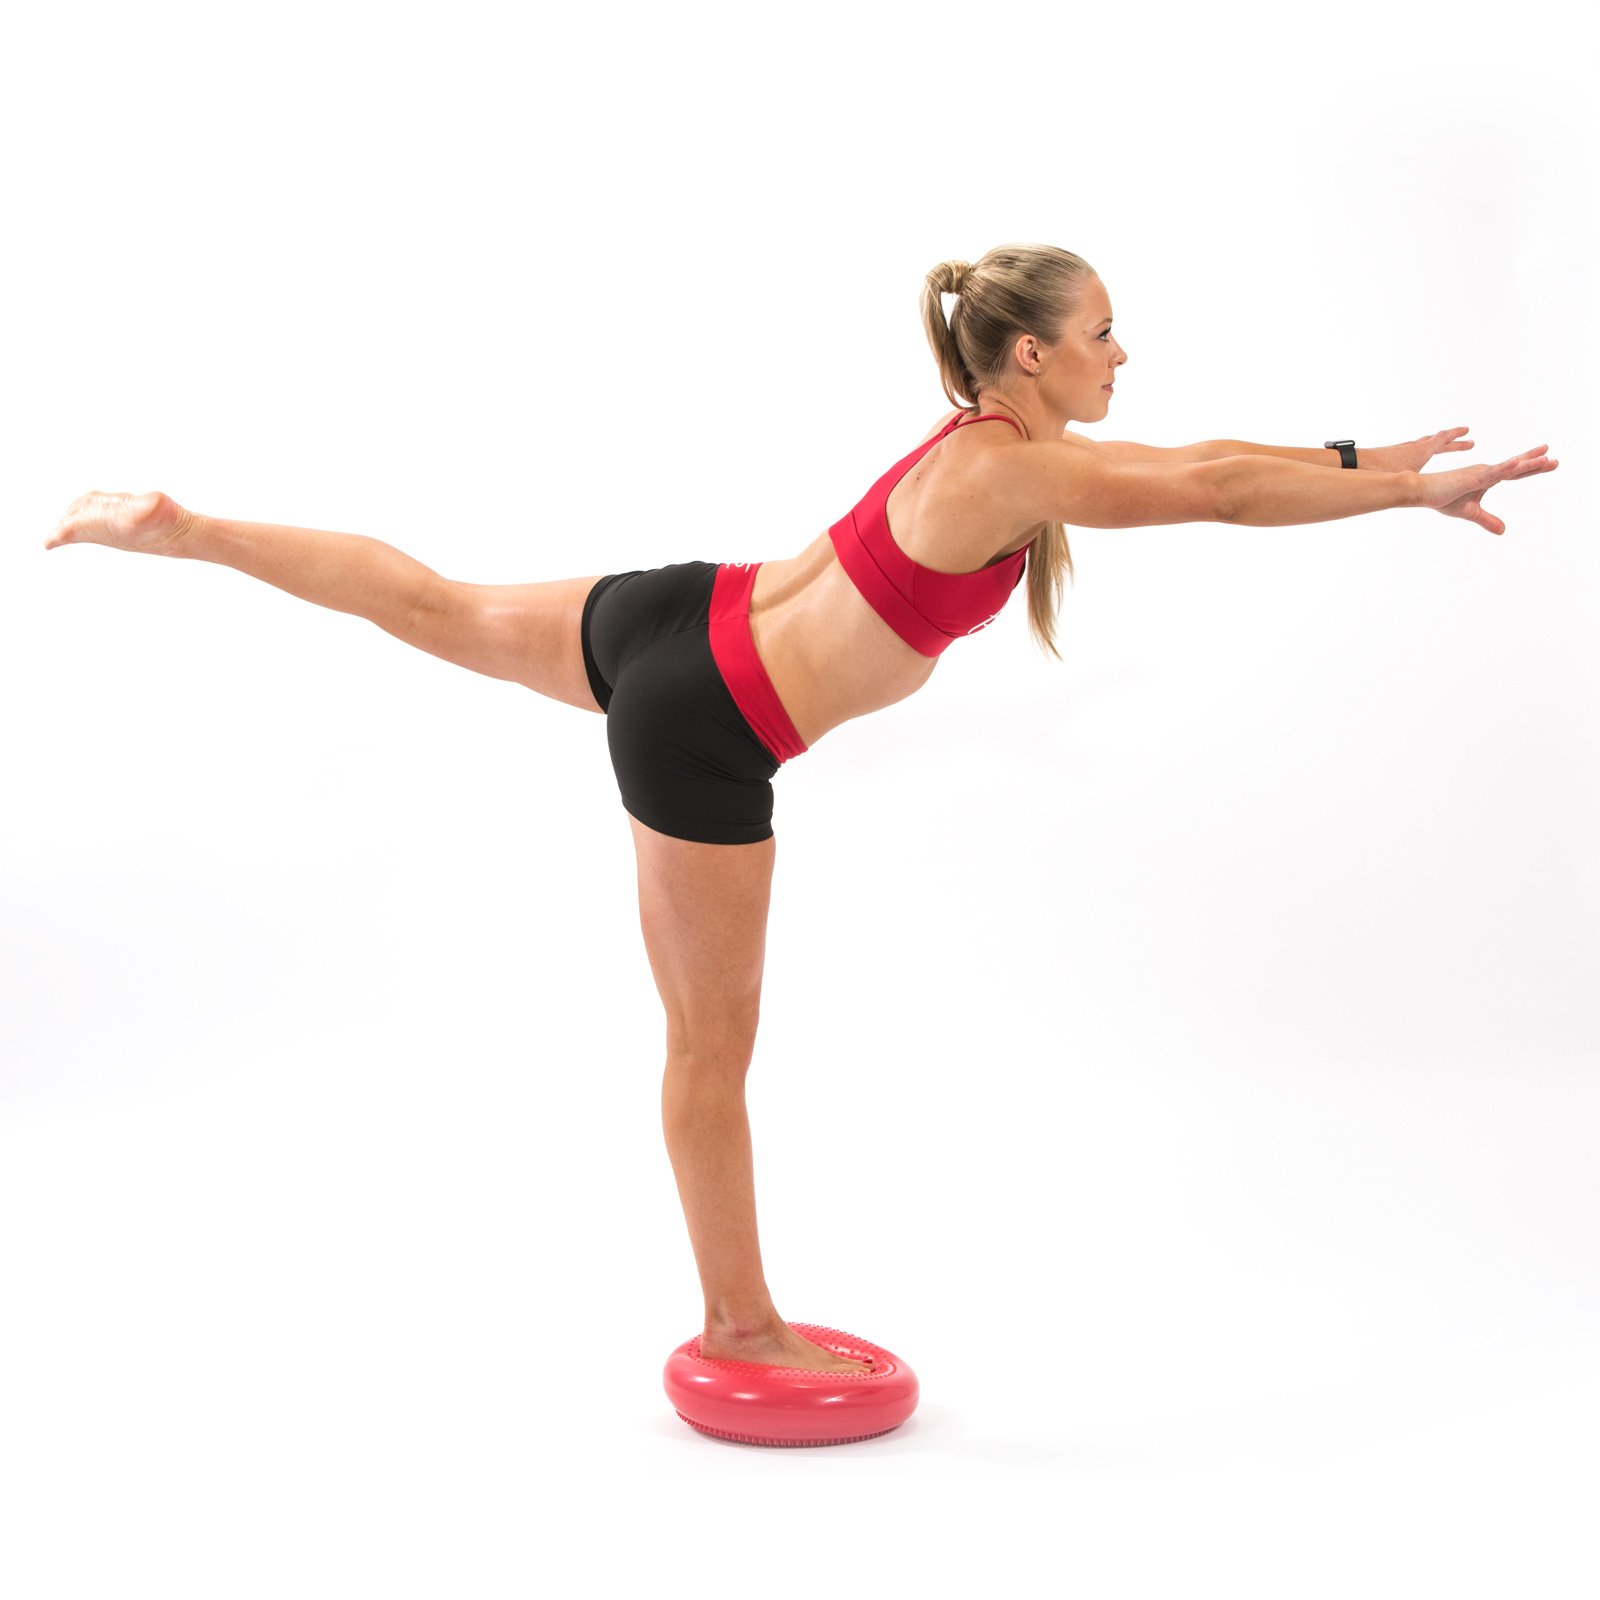 5 Balance Disc Exercises for Great Abs